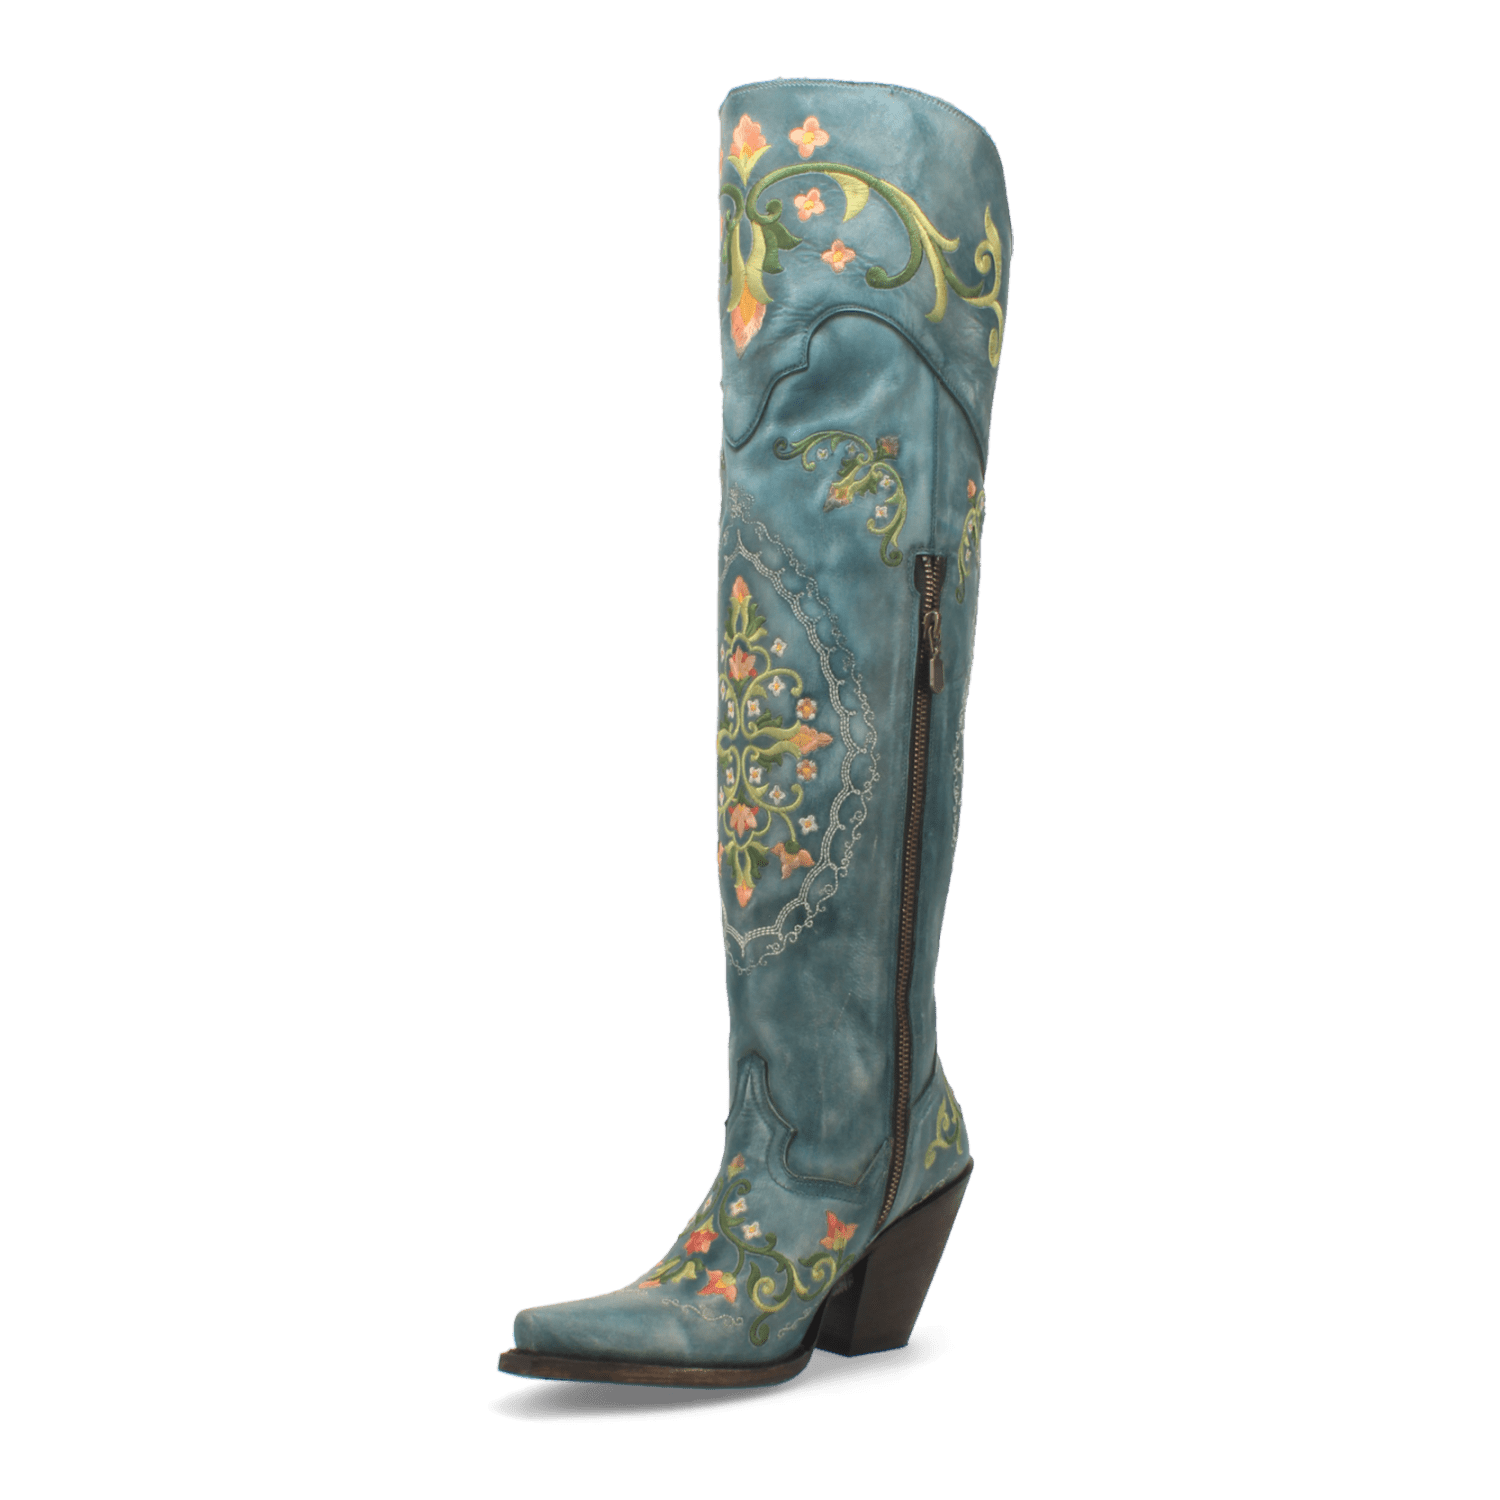 FLOWER CHILD LEATHER BOOT Image